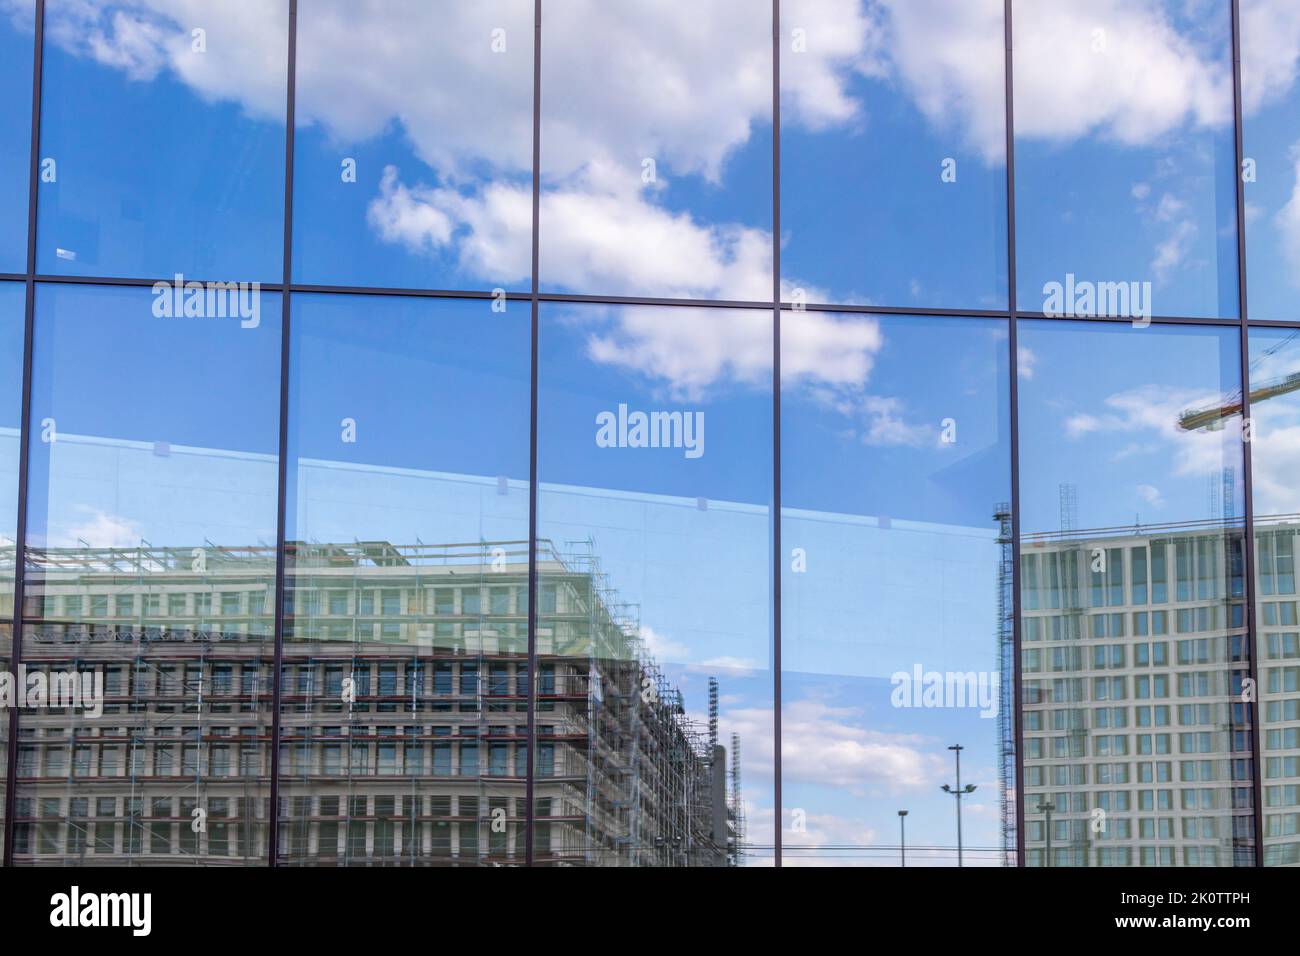 Reflection of a large construction site with new buildings and slightly cloudy sky in a glass facade of a modern building Stock Photo